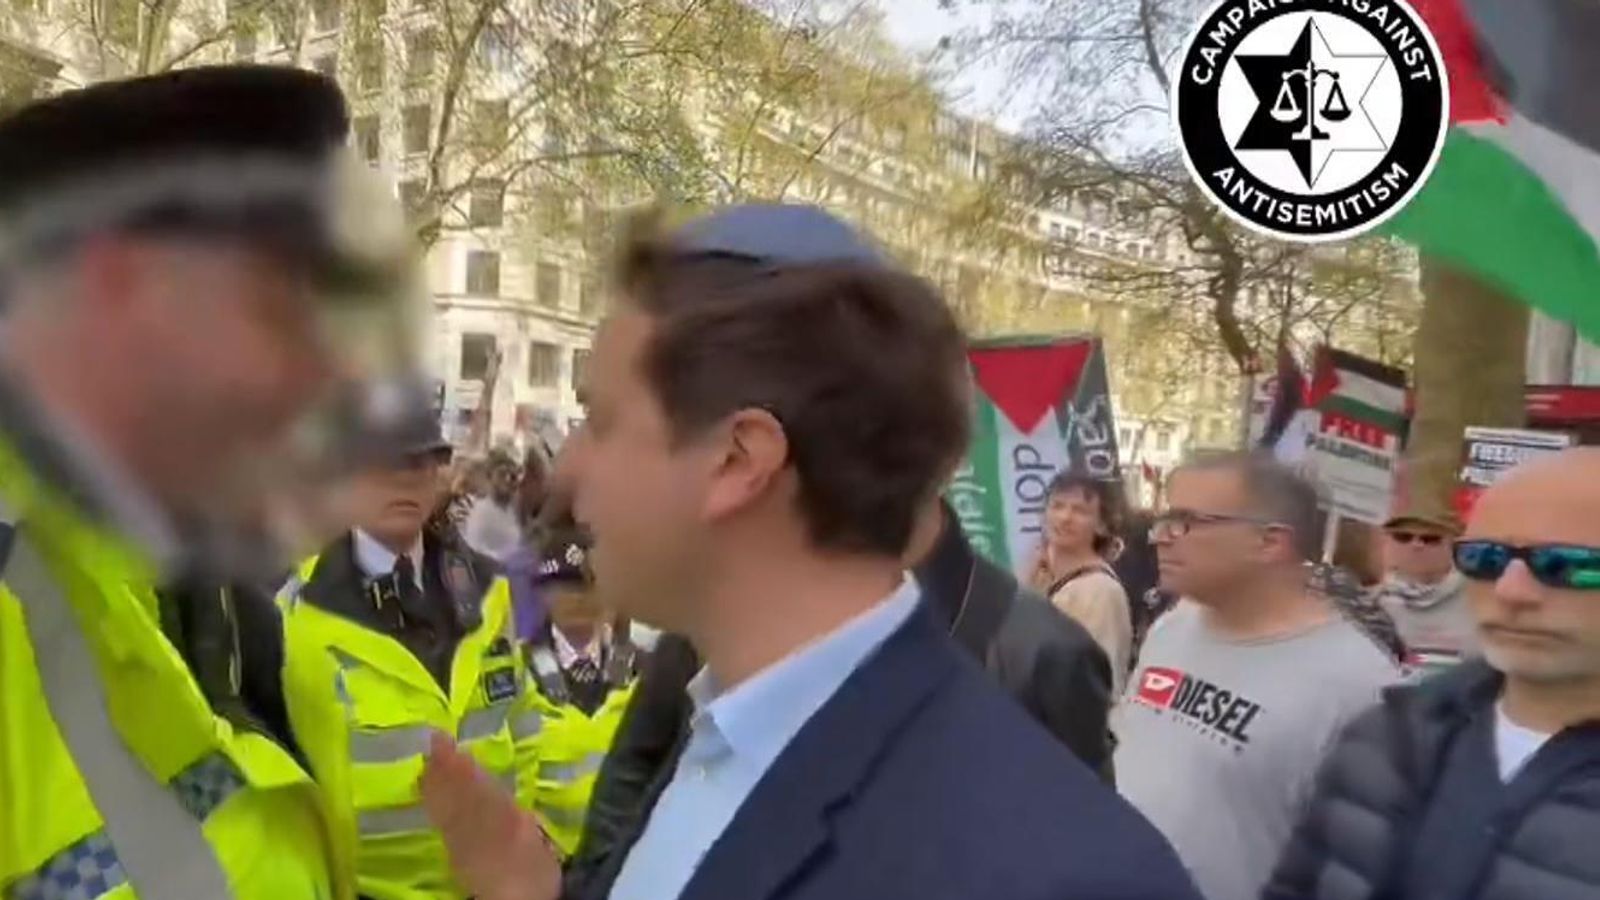 Met Police apologises twice after using phrase 'openly Jewish' as campaigner accuses force of 'victim-blaming'